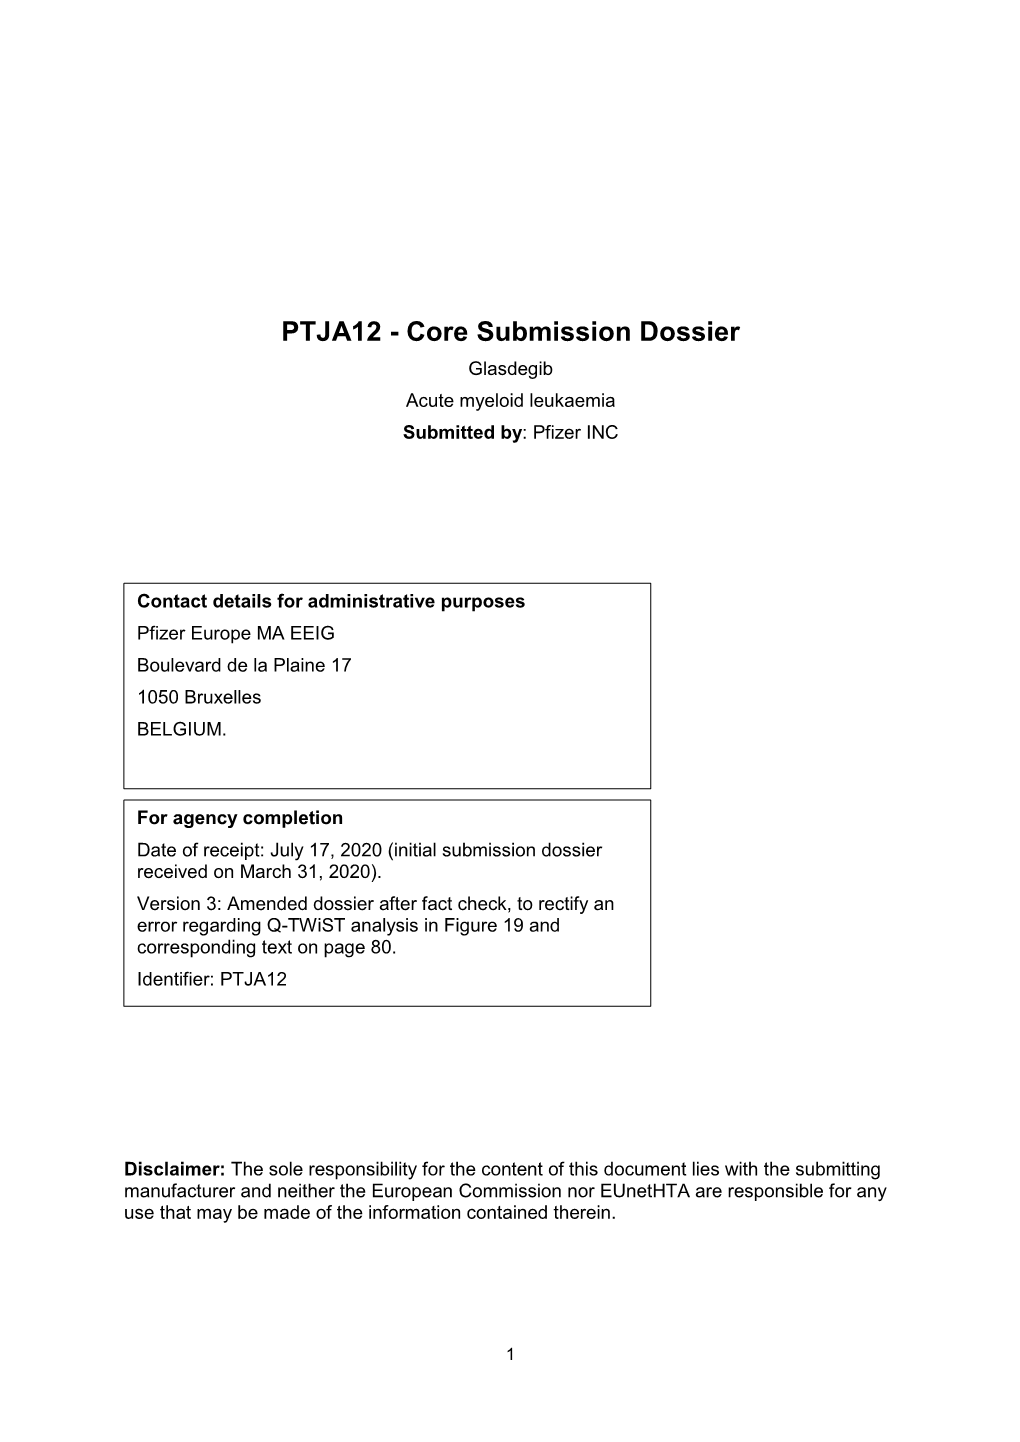 PTJA12 - Core Submission Dossier Glasdegib Acute Myeloid Leukaemia Submitted By: Pfizer INC